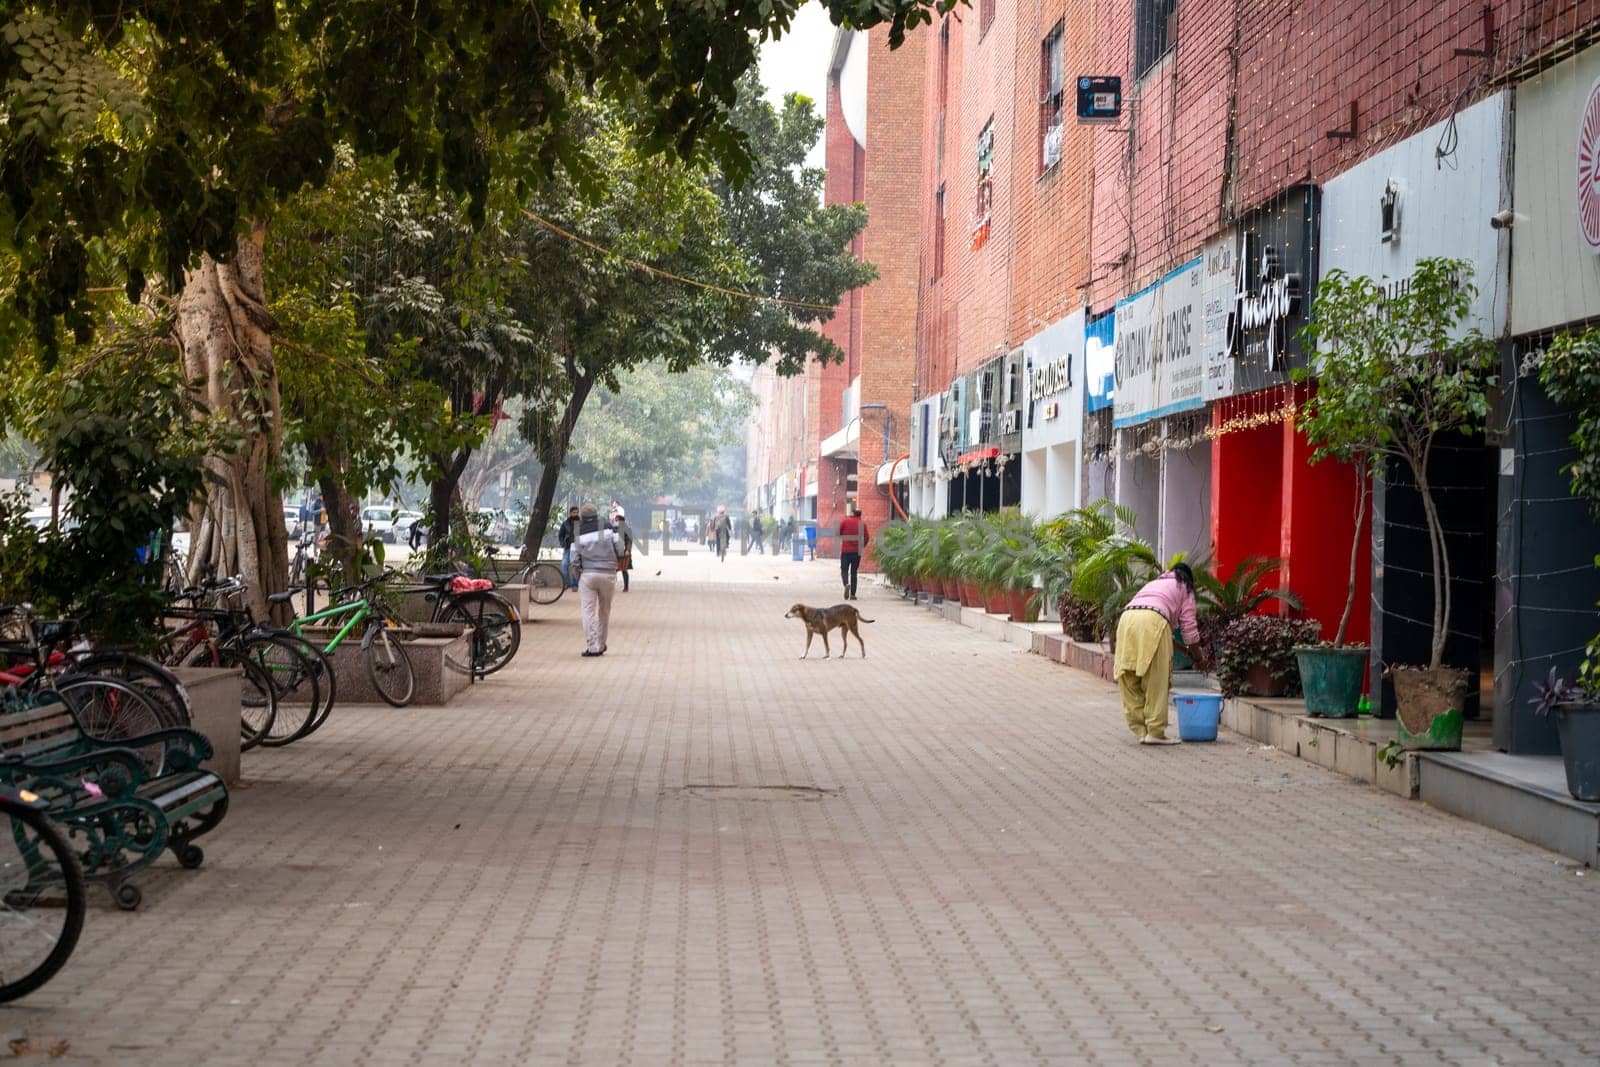 Chandigarh, India - circa 2023 : early morning scenes in sector 17 market chandigarh showing people shopping, cycles parked and cleaning happening in front of branded shops and food outlets in this landmark area